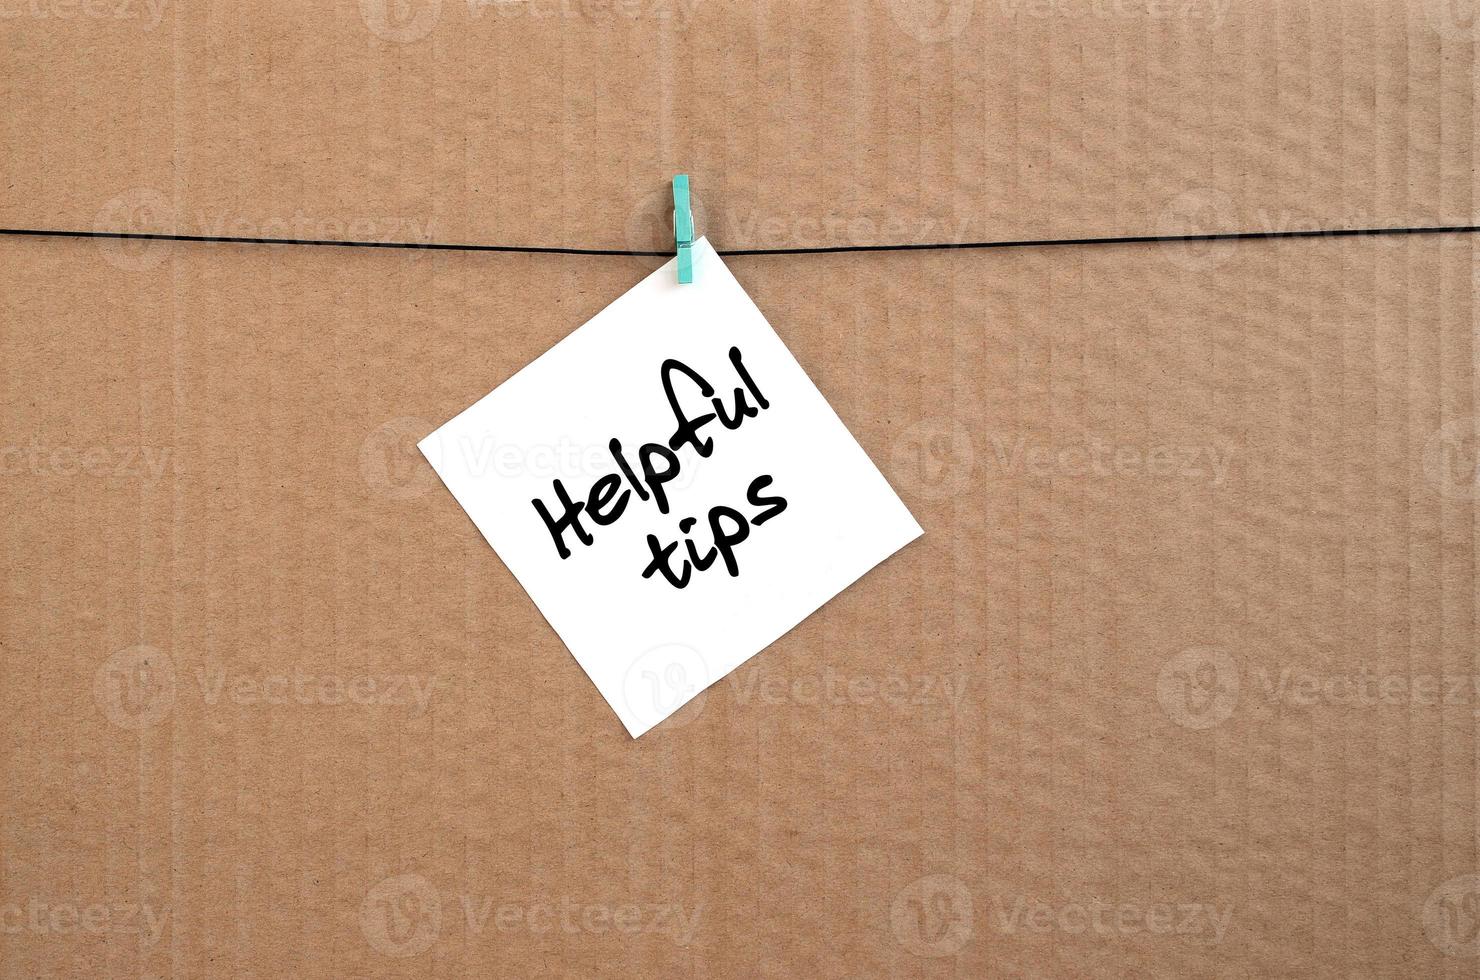 Helpful tips. Note is written on a white sticker that hangs with a clothespin on a rope on a background of brown cardboard photo